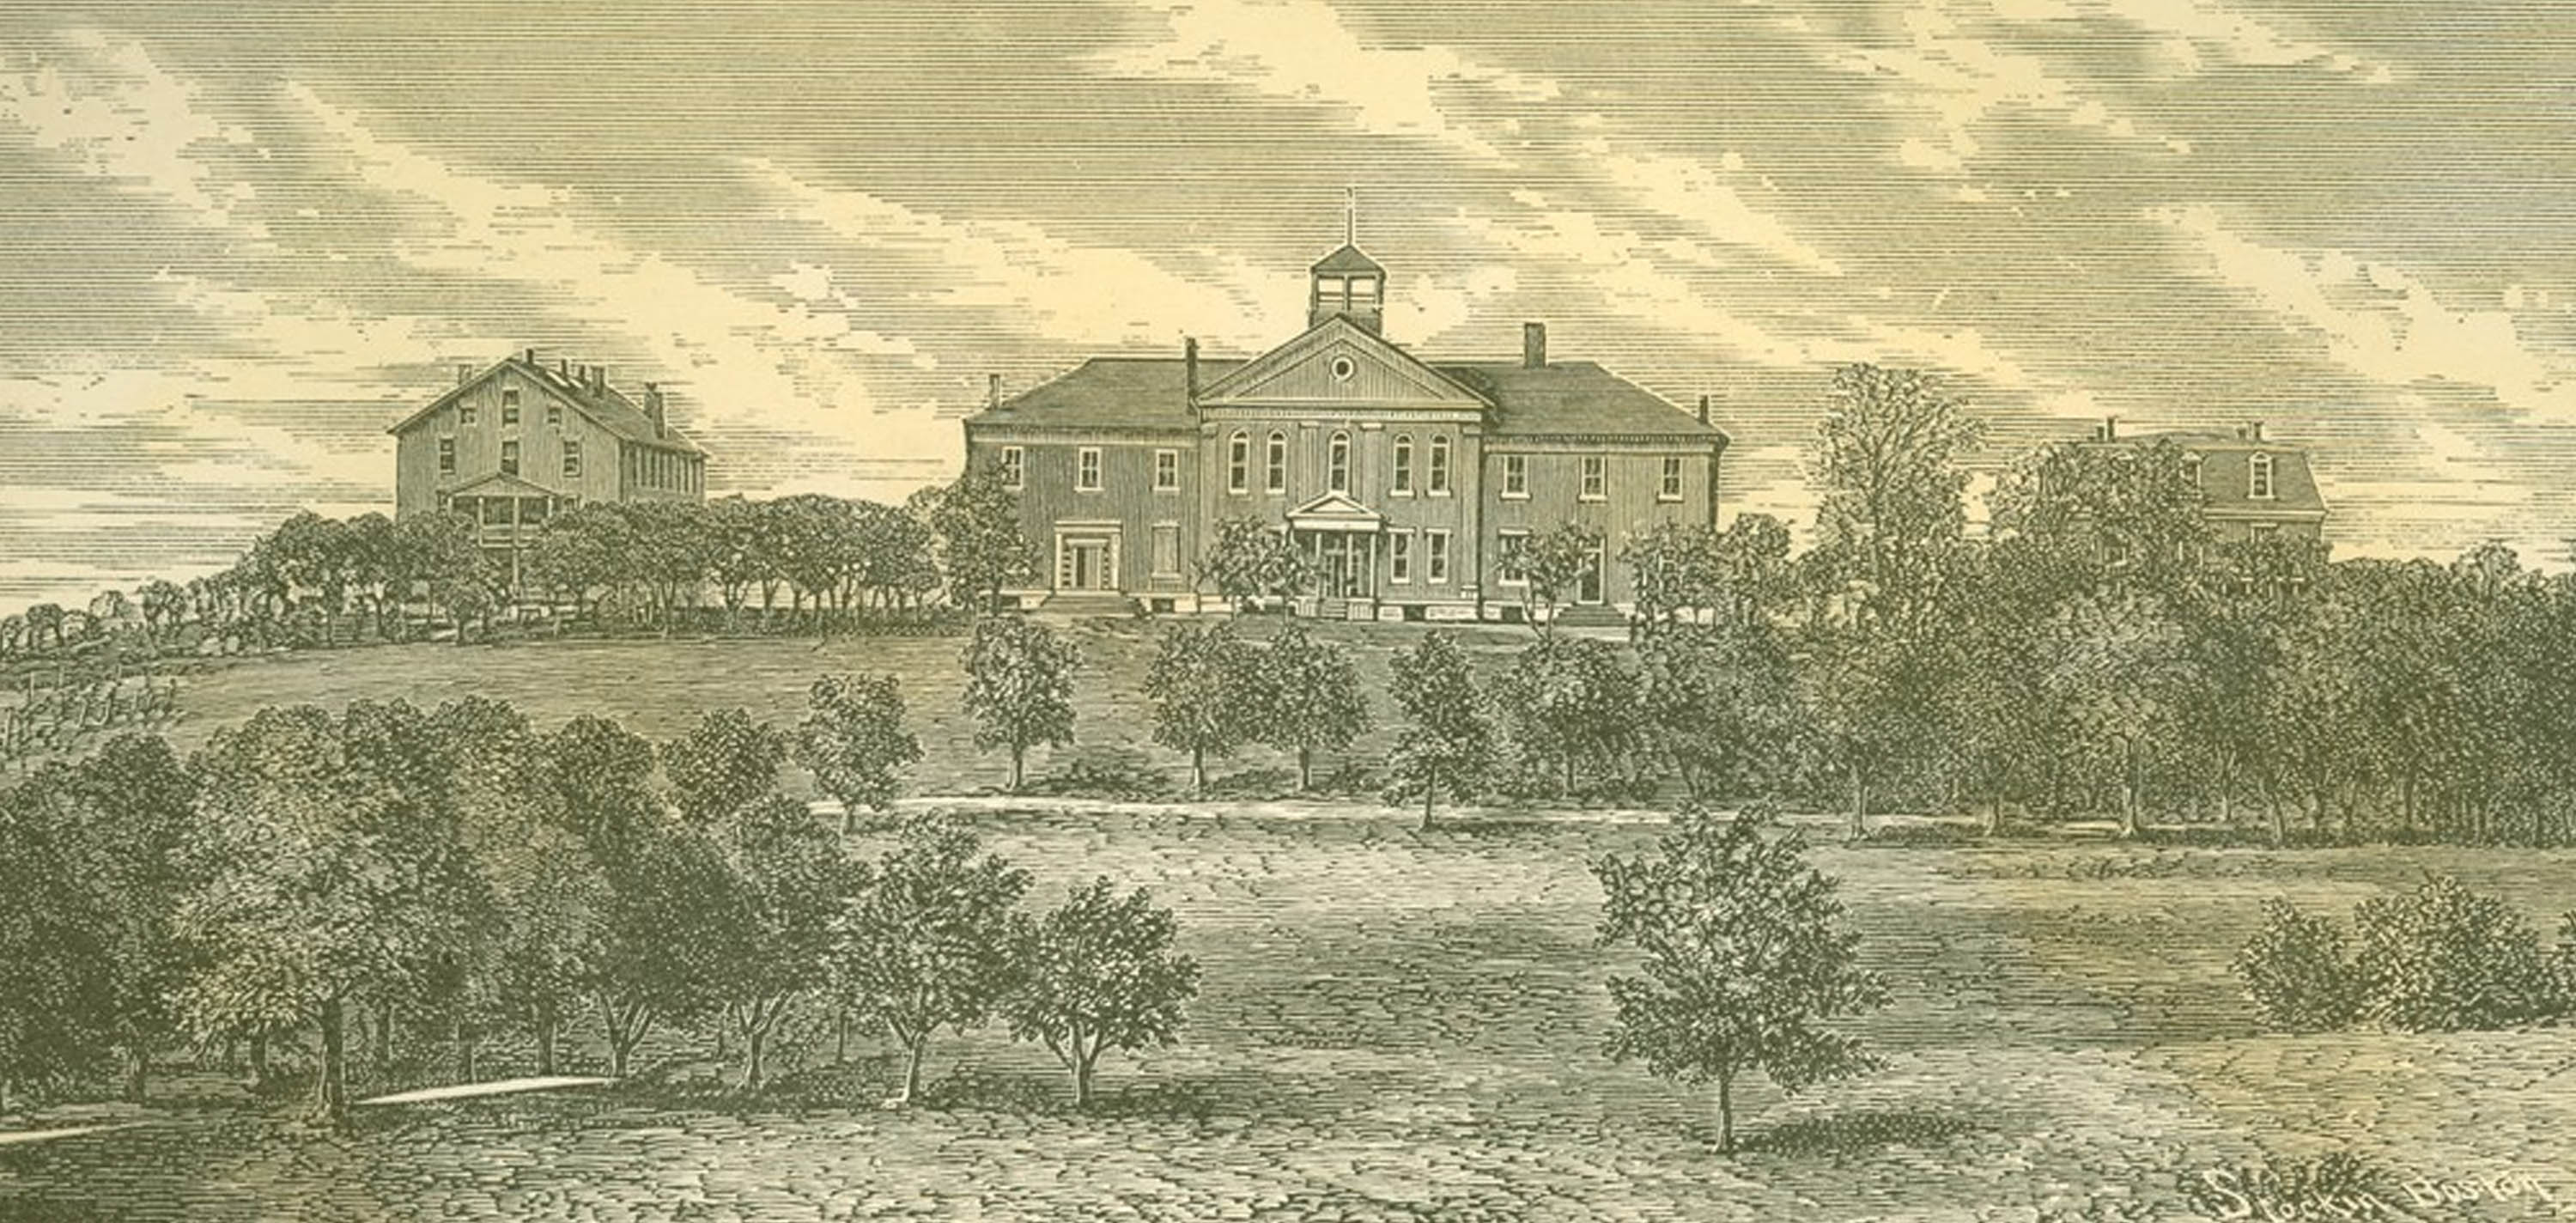 Early Storer College campus